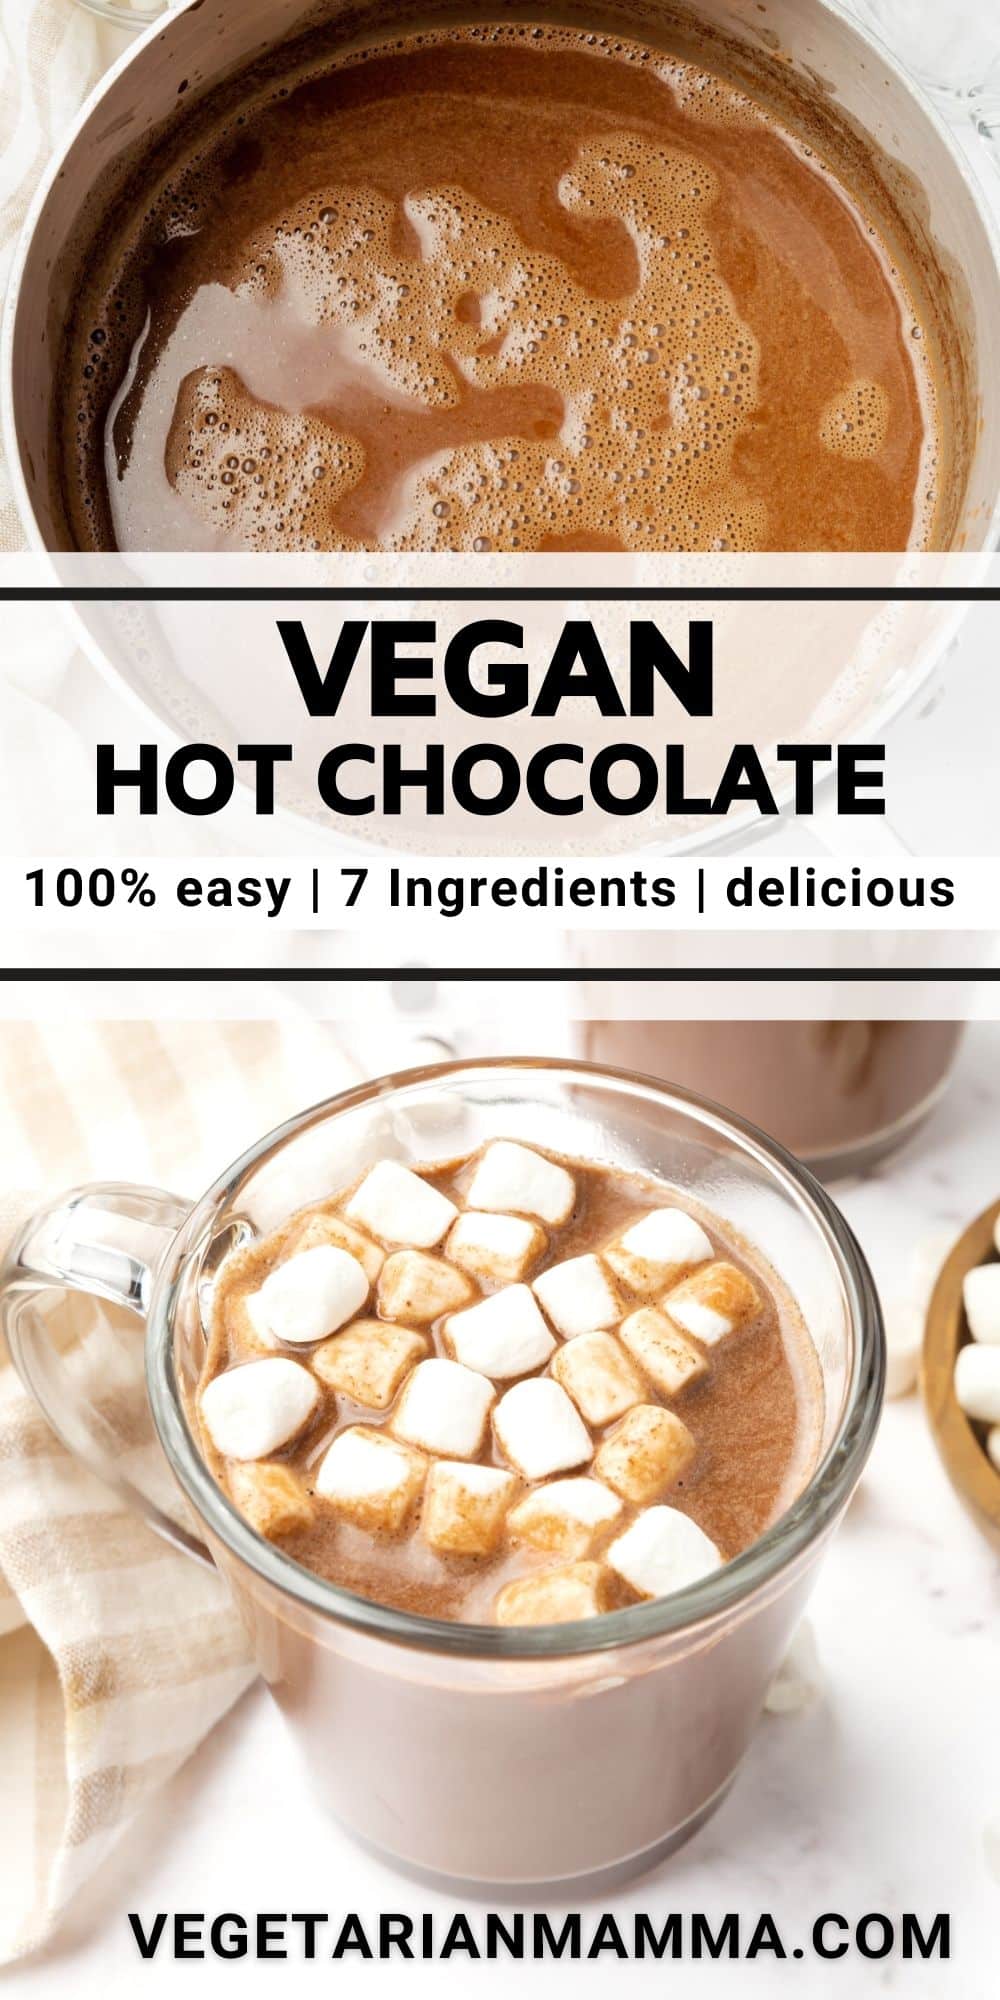 Rich and chocolatey, this vegan hot chocolate with marshmallows is made on the stove in less than 10 minutes with all-natural ingredients.